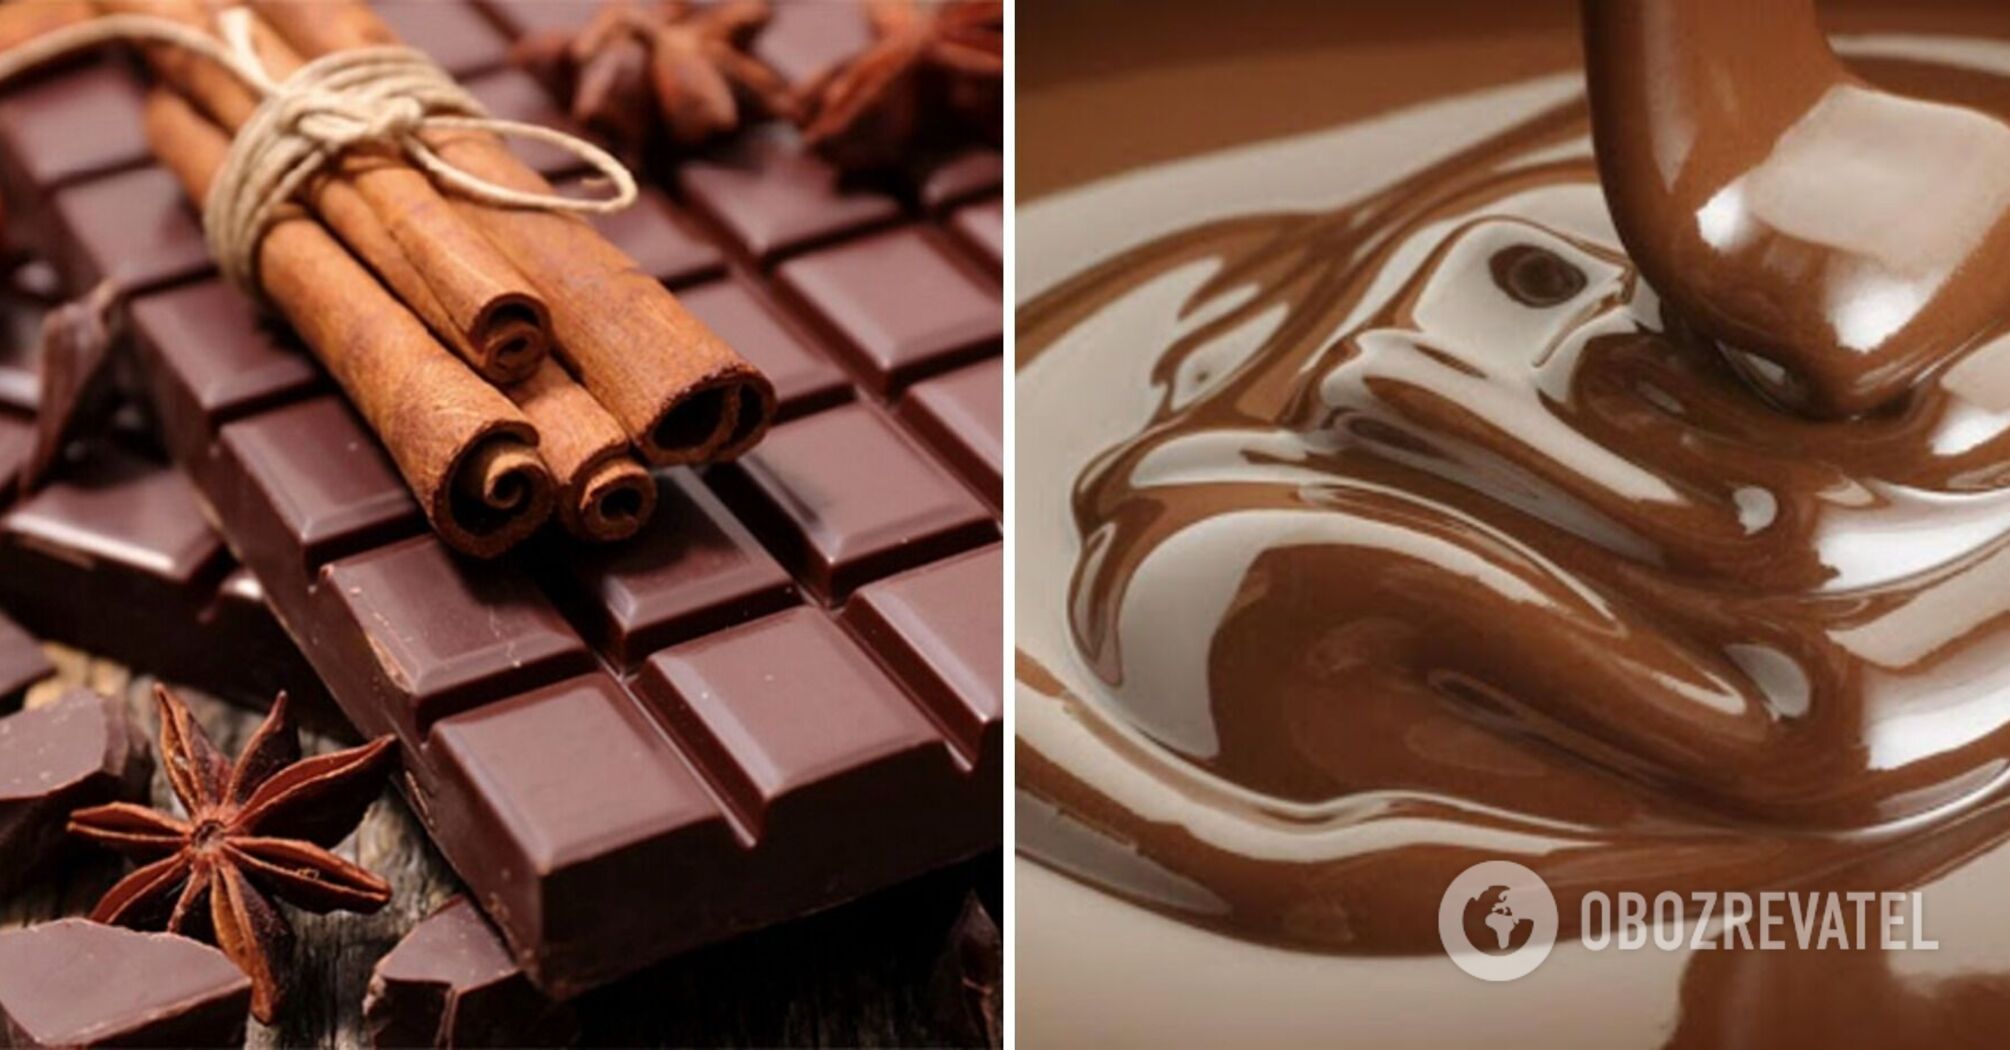 The main things you need to know about chocolate